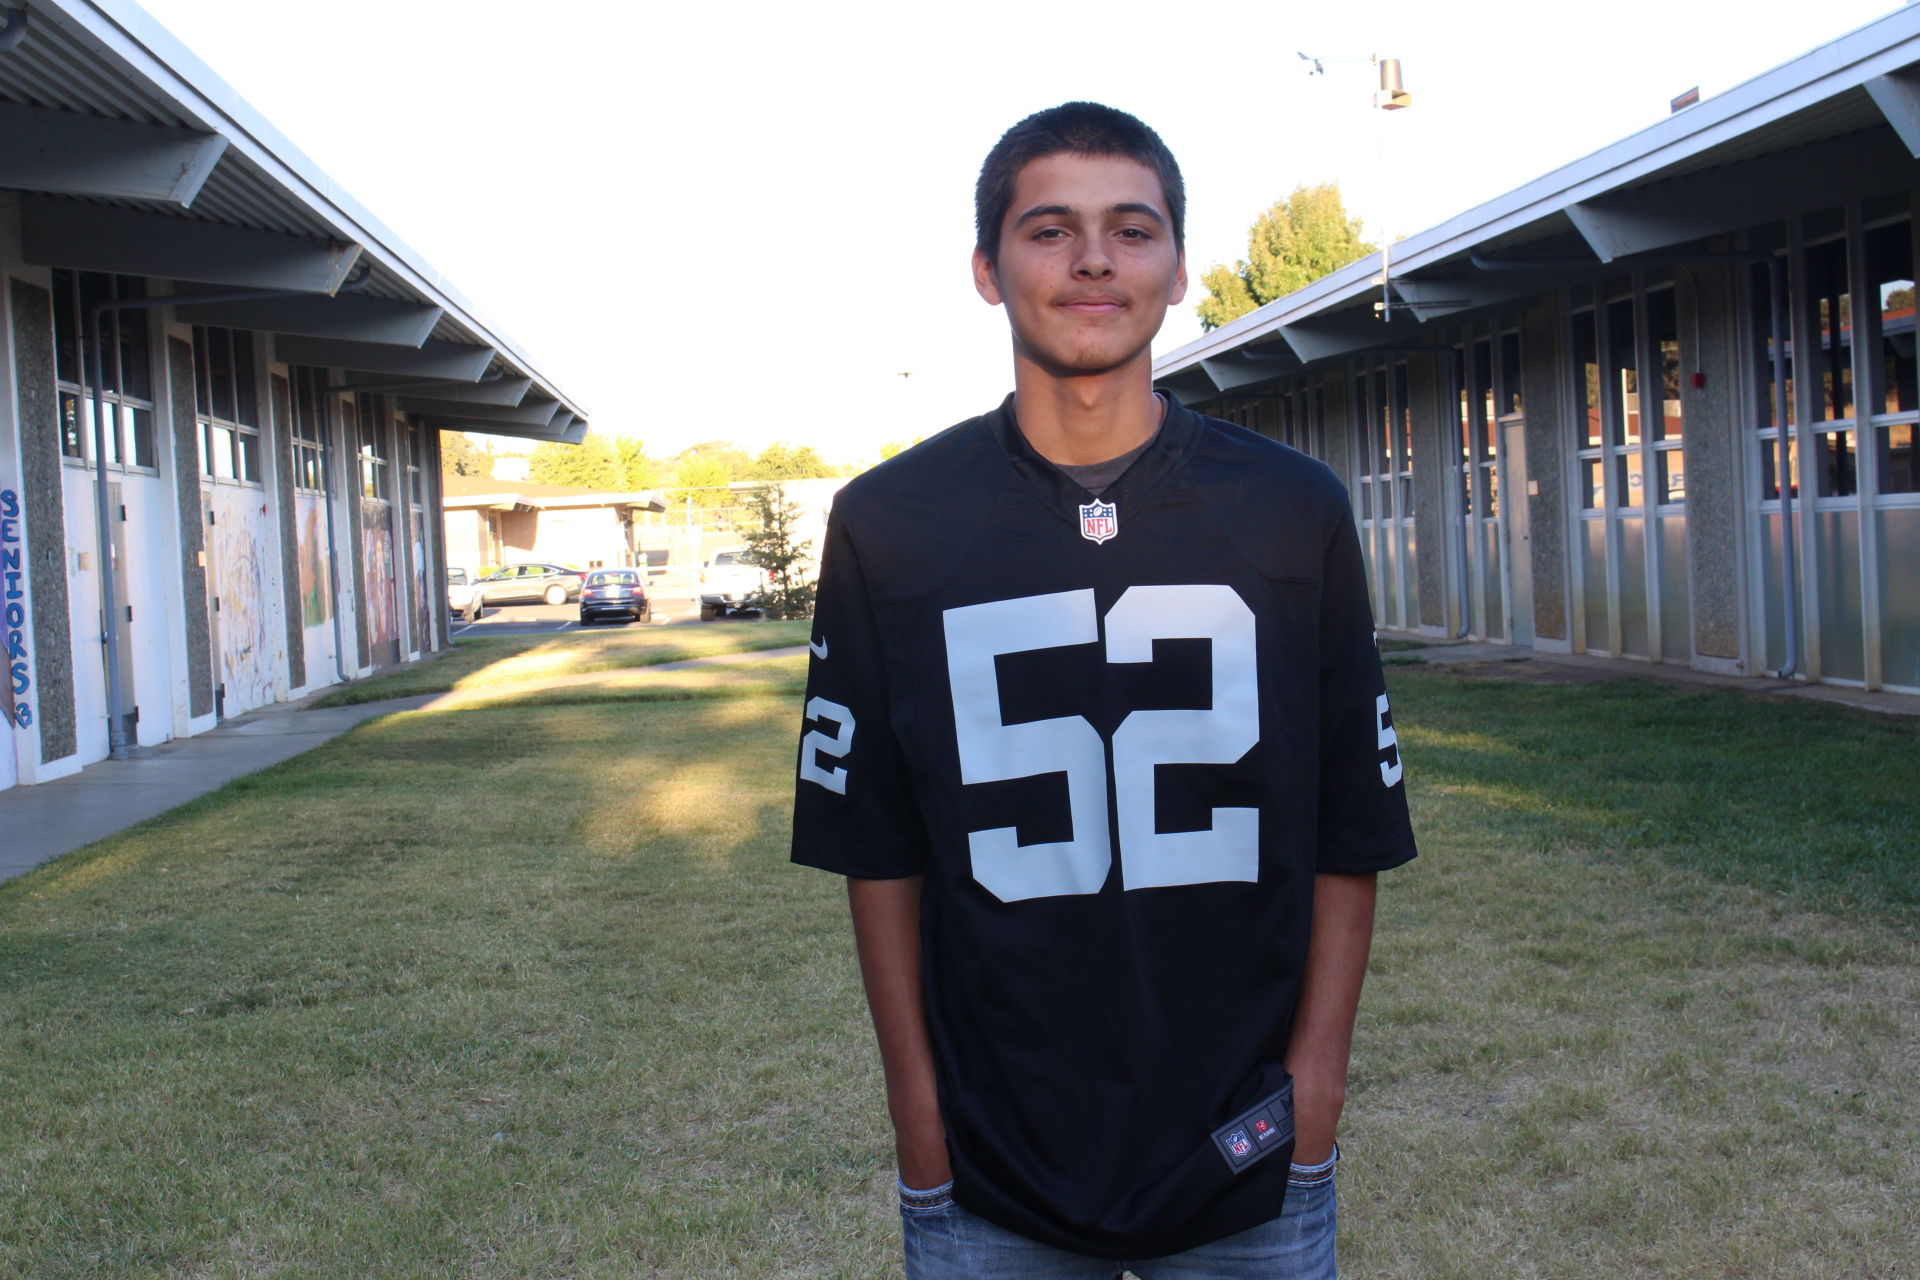 Rodrigo Lupercio plays football, basketball and baseball at Clear Lake High. He says more physical activity through sports at Indian reservations could decrease substance abuse.